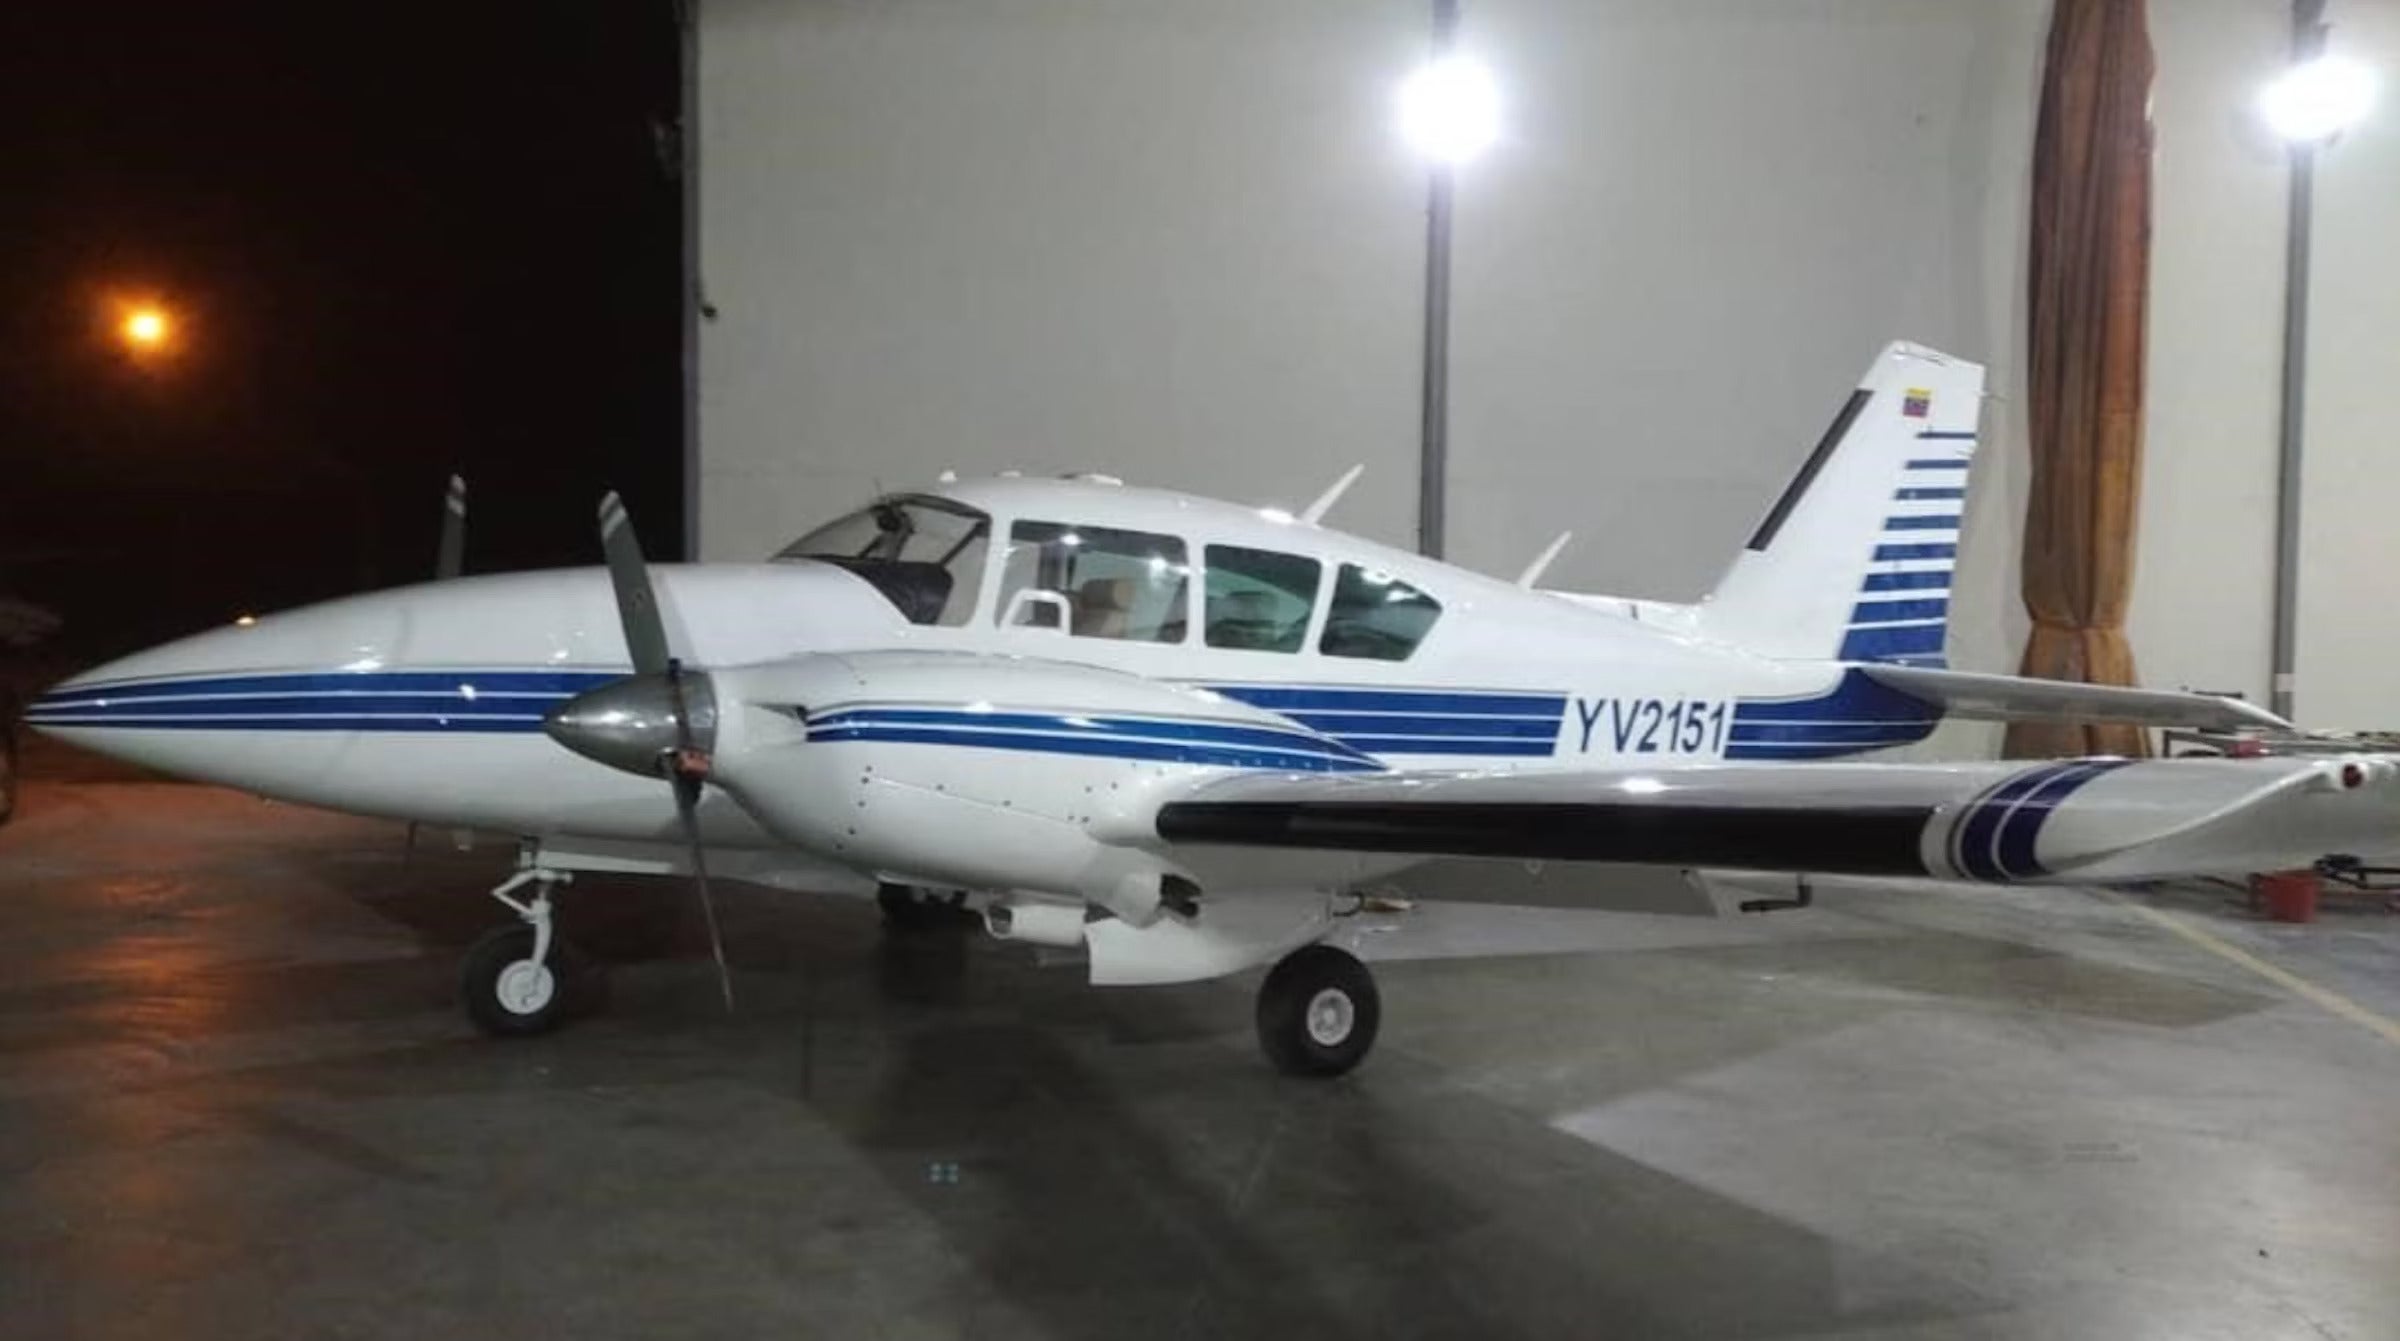 This 1975 Piper PA-23-250 Aztec Is a Roomy ‘AircraftForSale’ Top Pick for Travelers